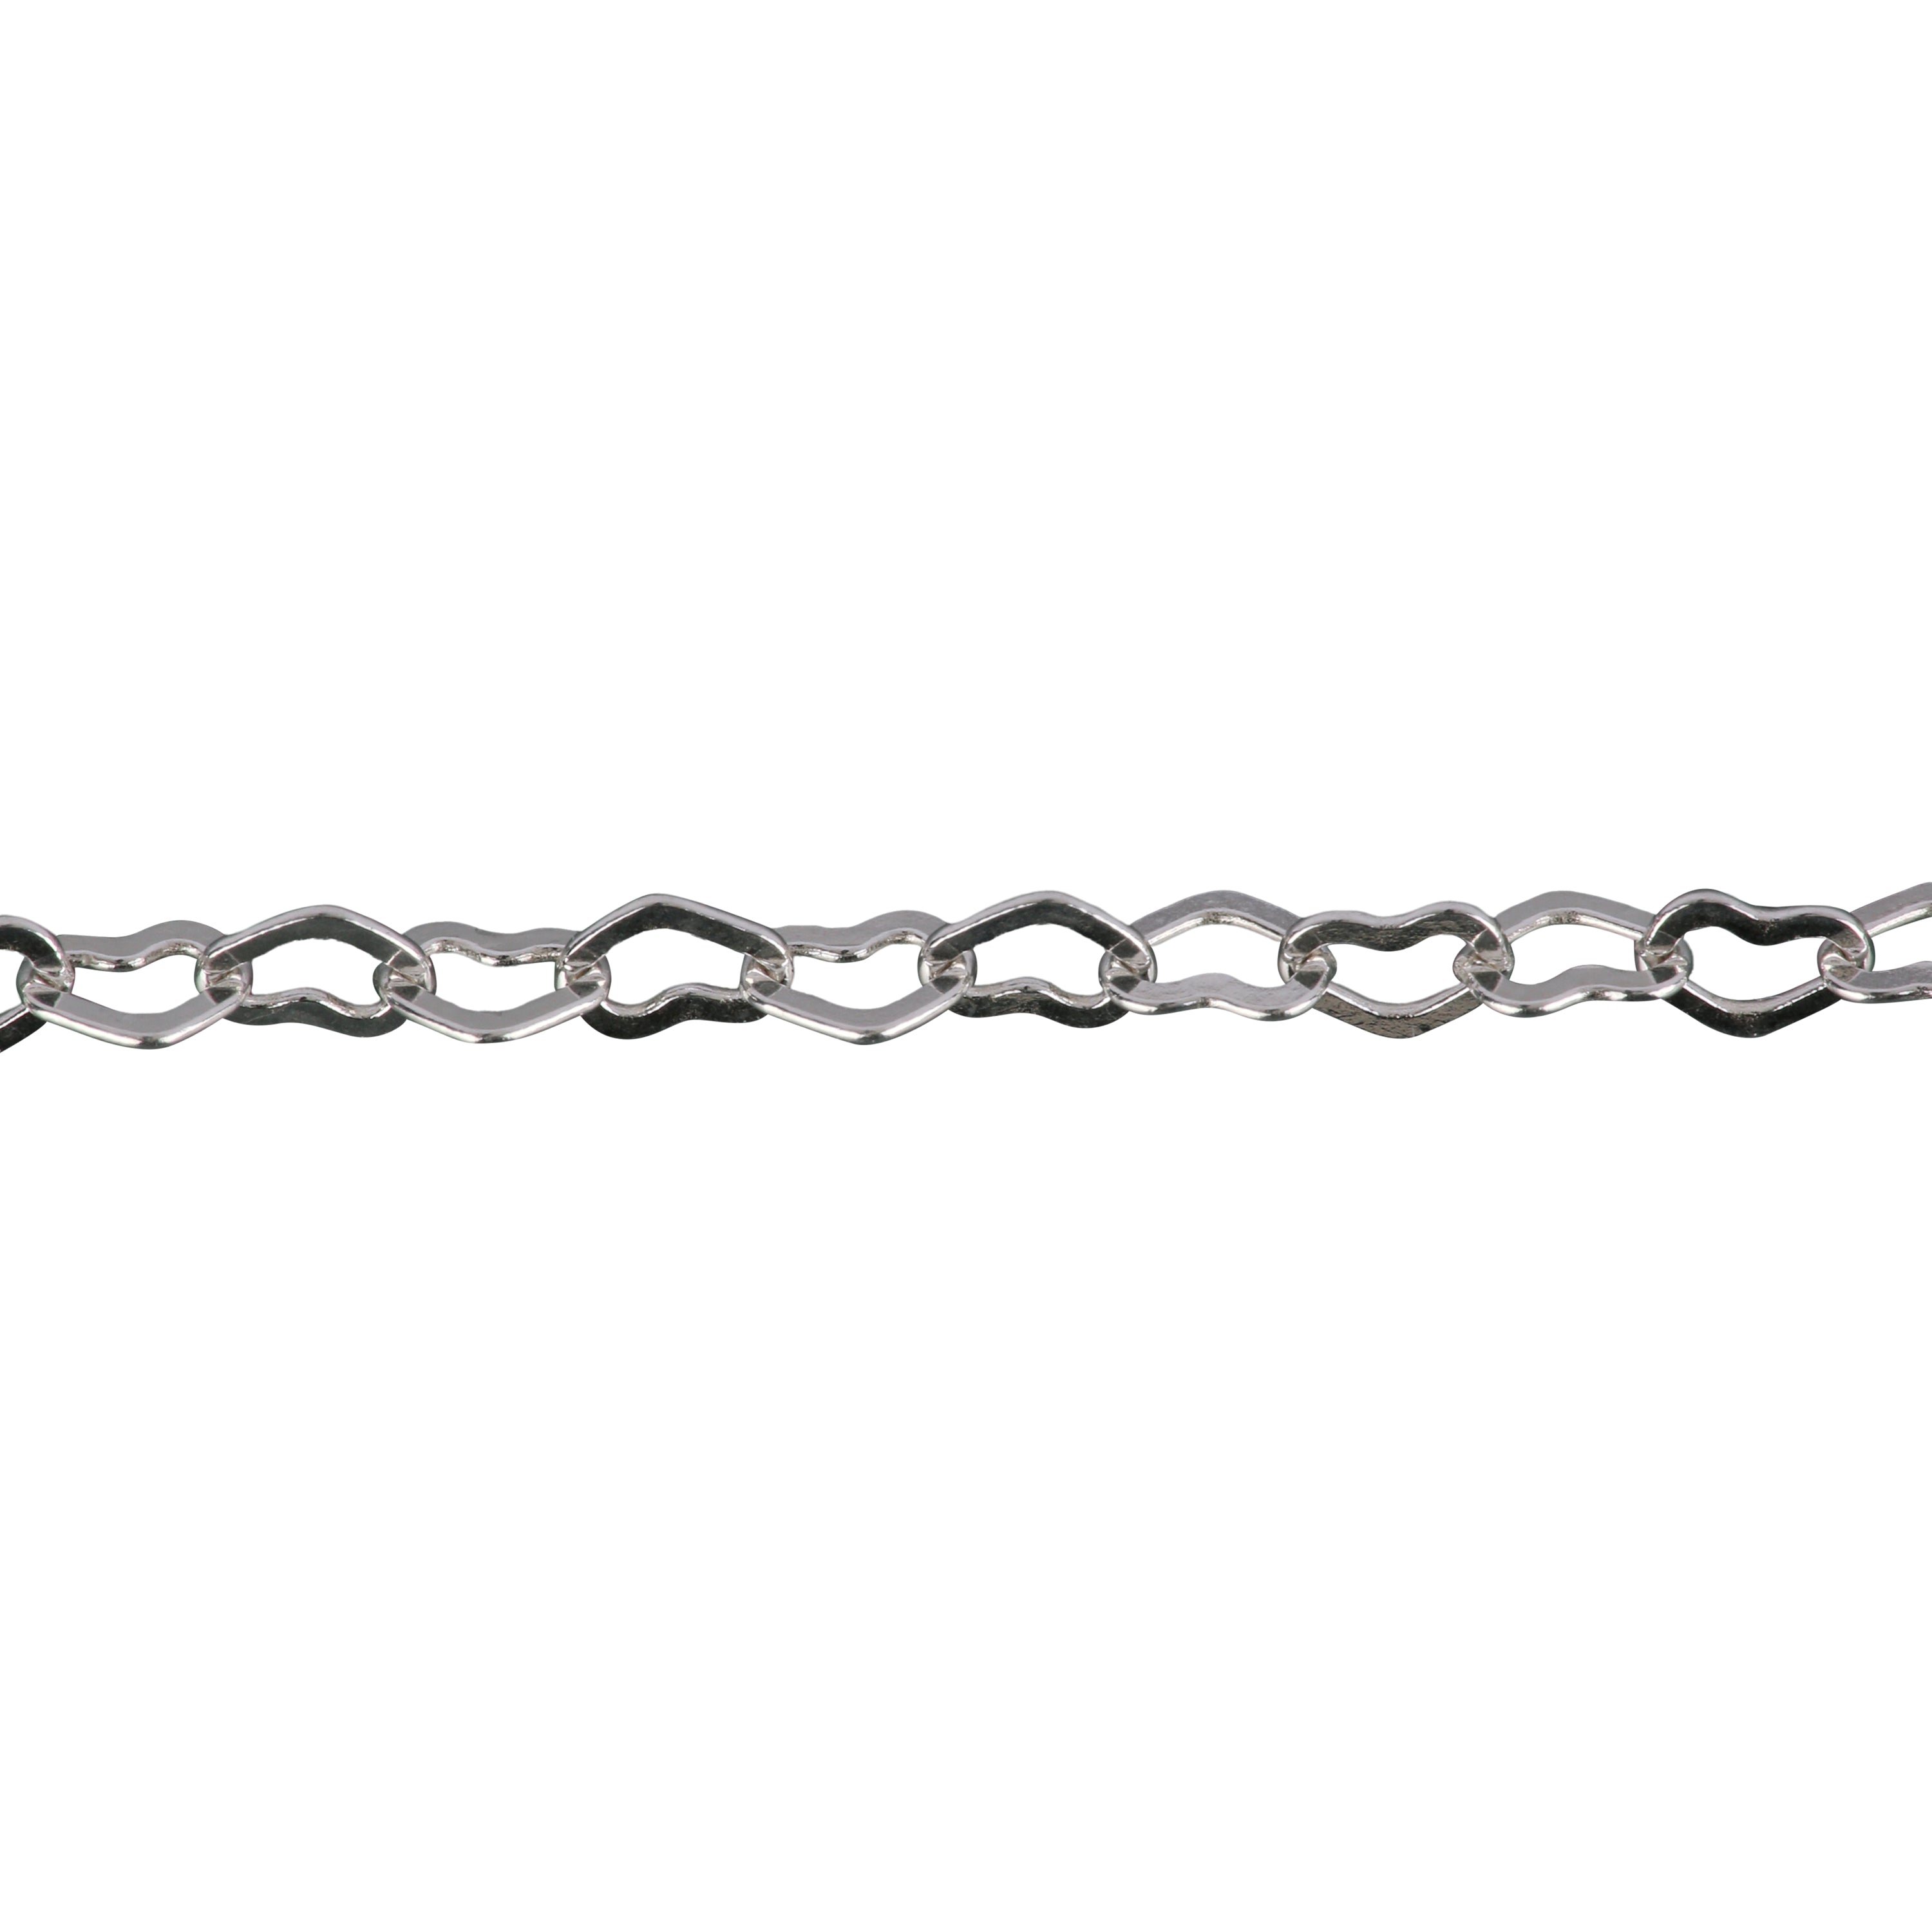 Flat Heart Silver Chain for Permanent Jewelry Amore, 3mm Hearts 5ft (60)